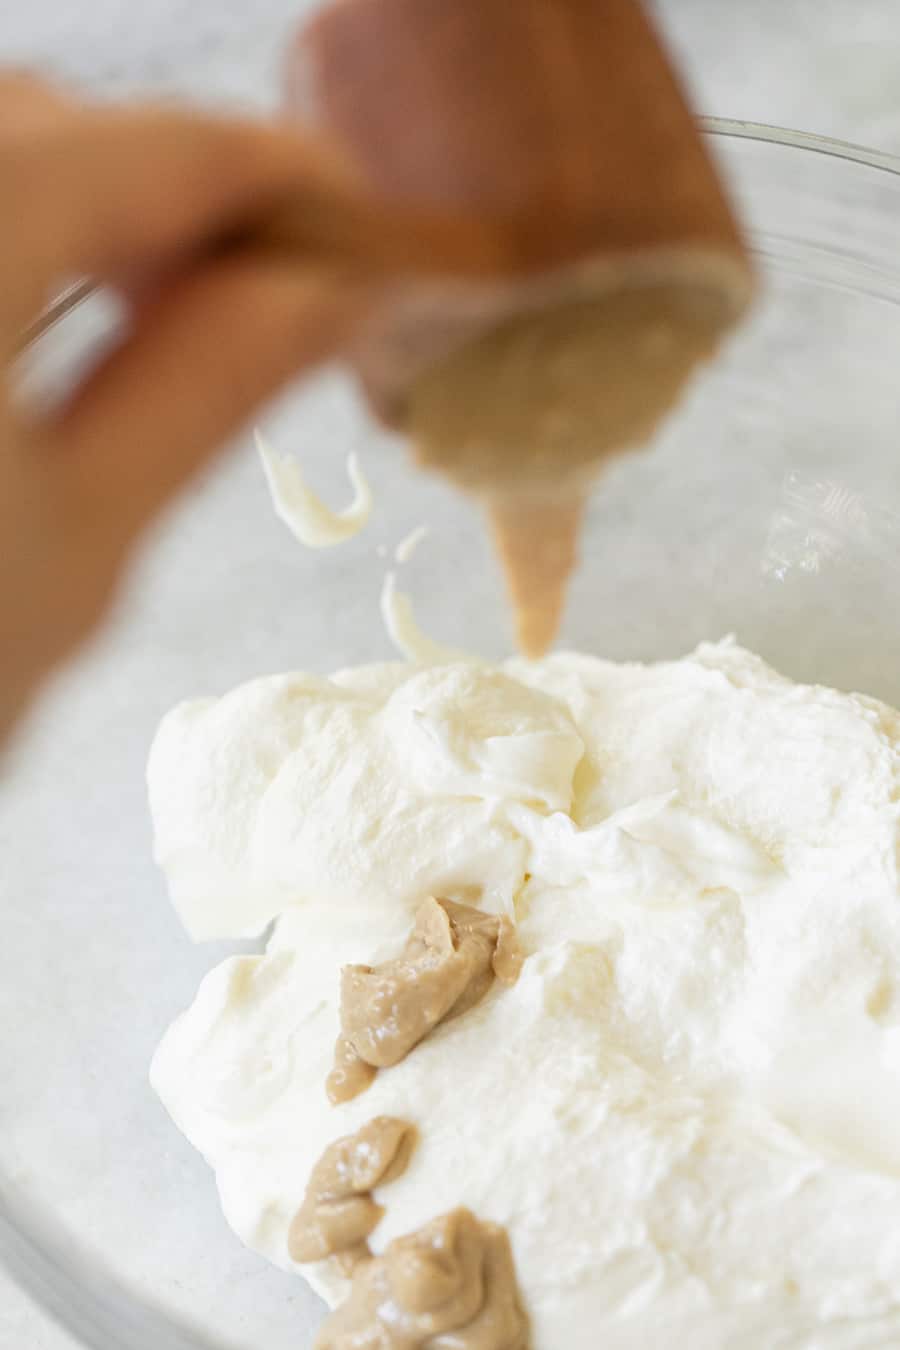 Tahini being poured into a bowl of yogurt.